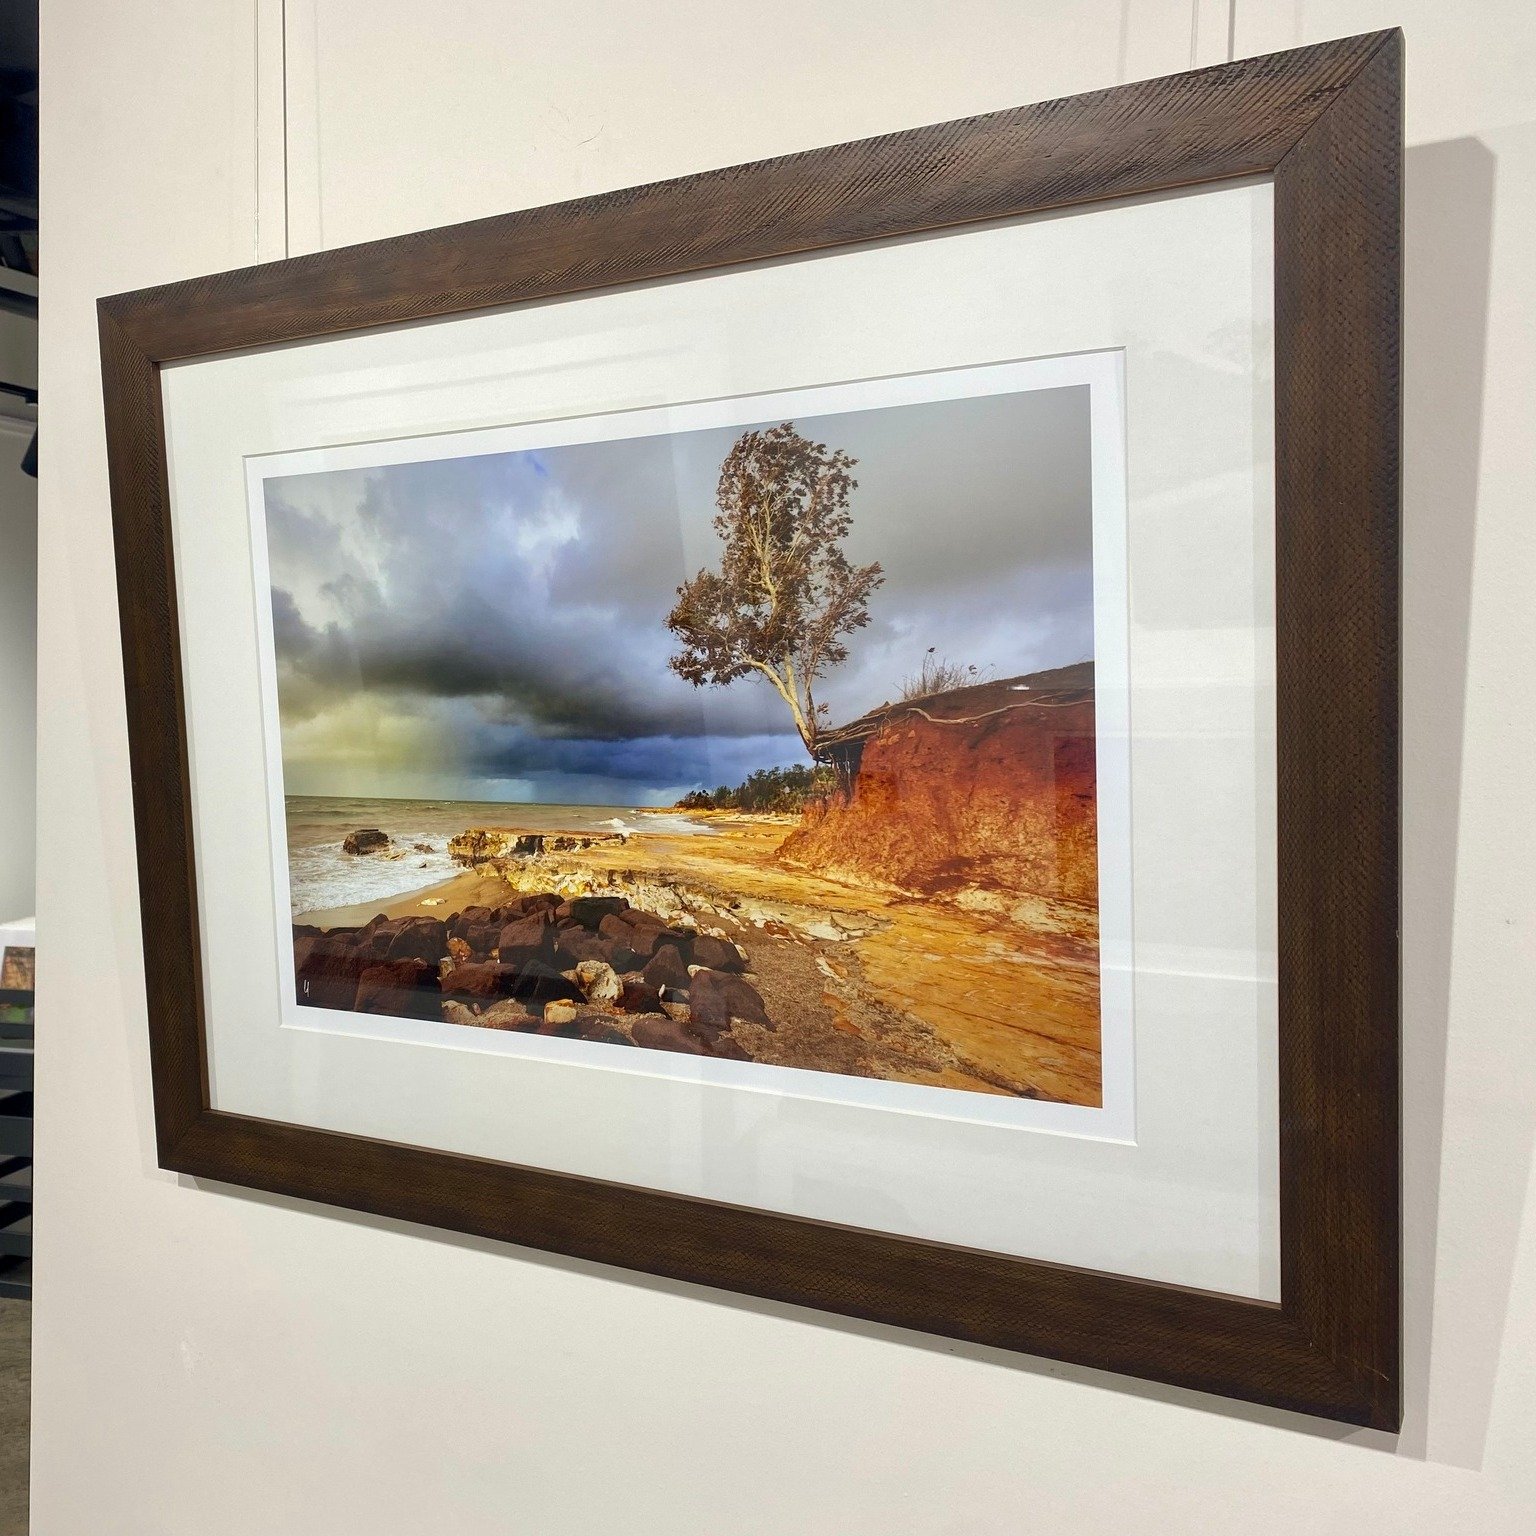 Mother's Day next weekend, and the beautiful Mother's Day Craft Fair is here at Darwin Waterfront tomorrow morning.

If you're looking for something for Mum, we've got plenty of lovely local landscape photography ready to go straight on her wall. Her